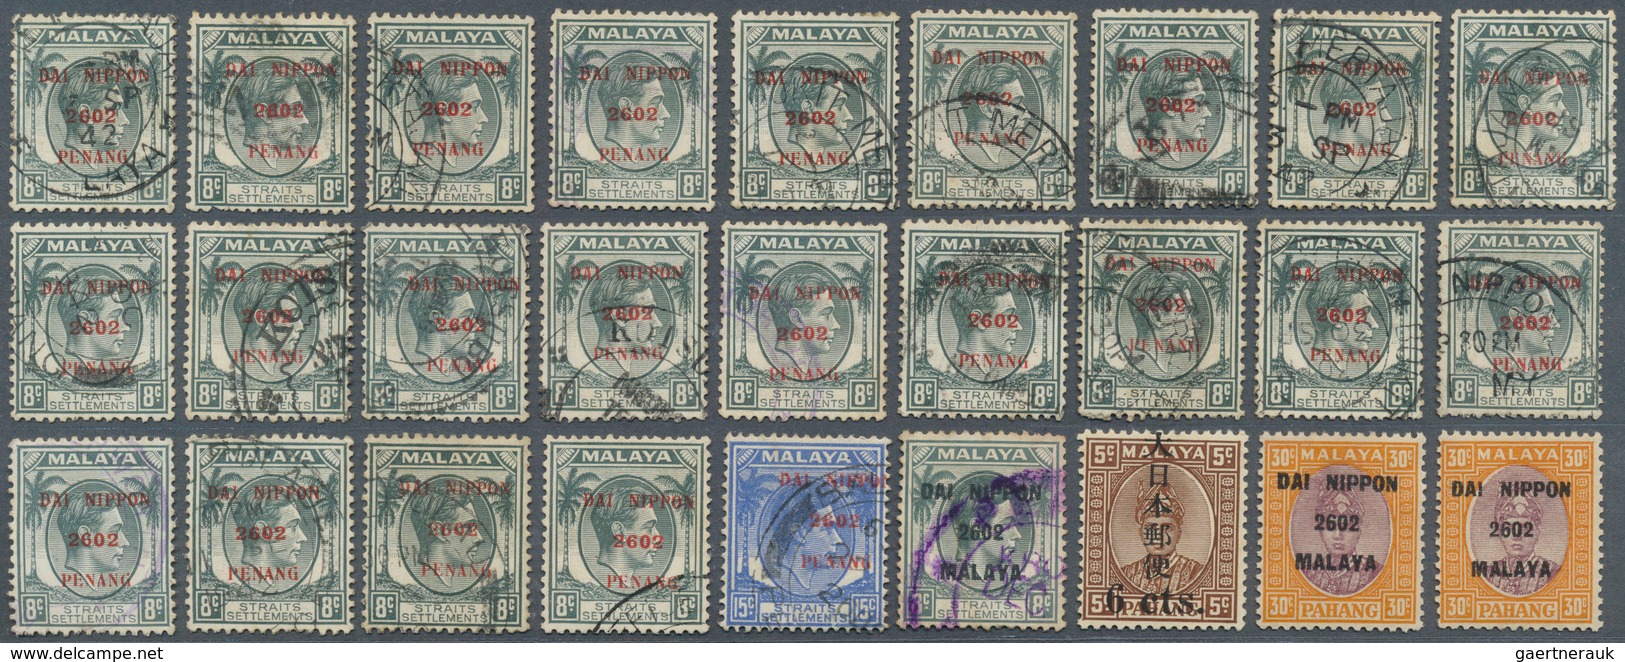 29474 Japanische Besetzung  WK II - Malaya: Penang, 1942/45, Two Covers Inc. One Registered Used From Pena - Malaysia (1964-...)